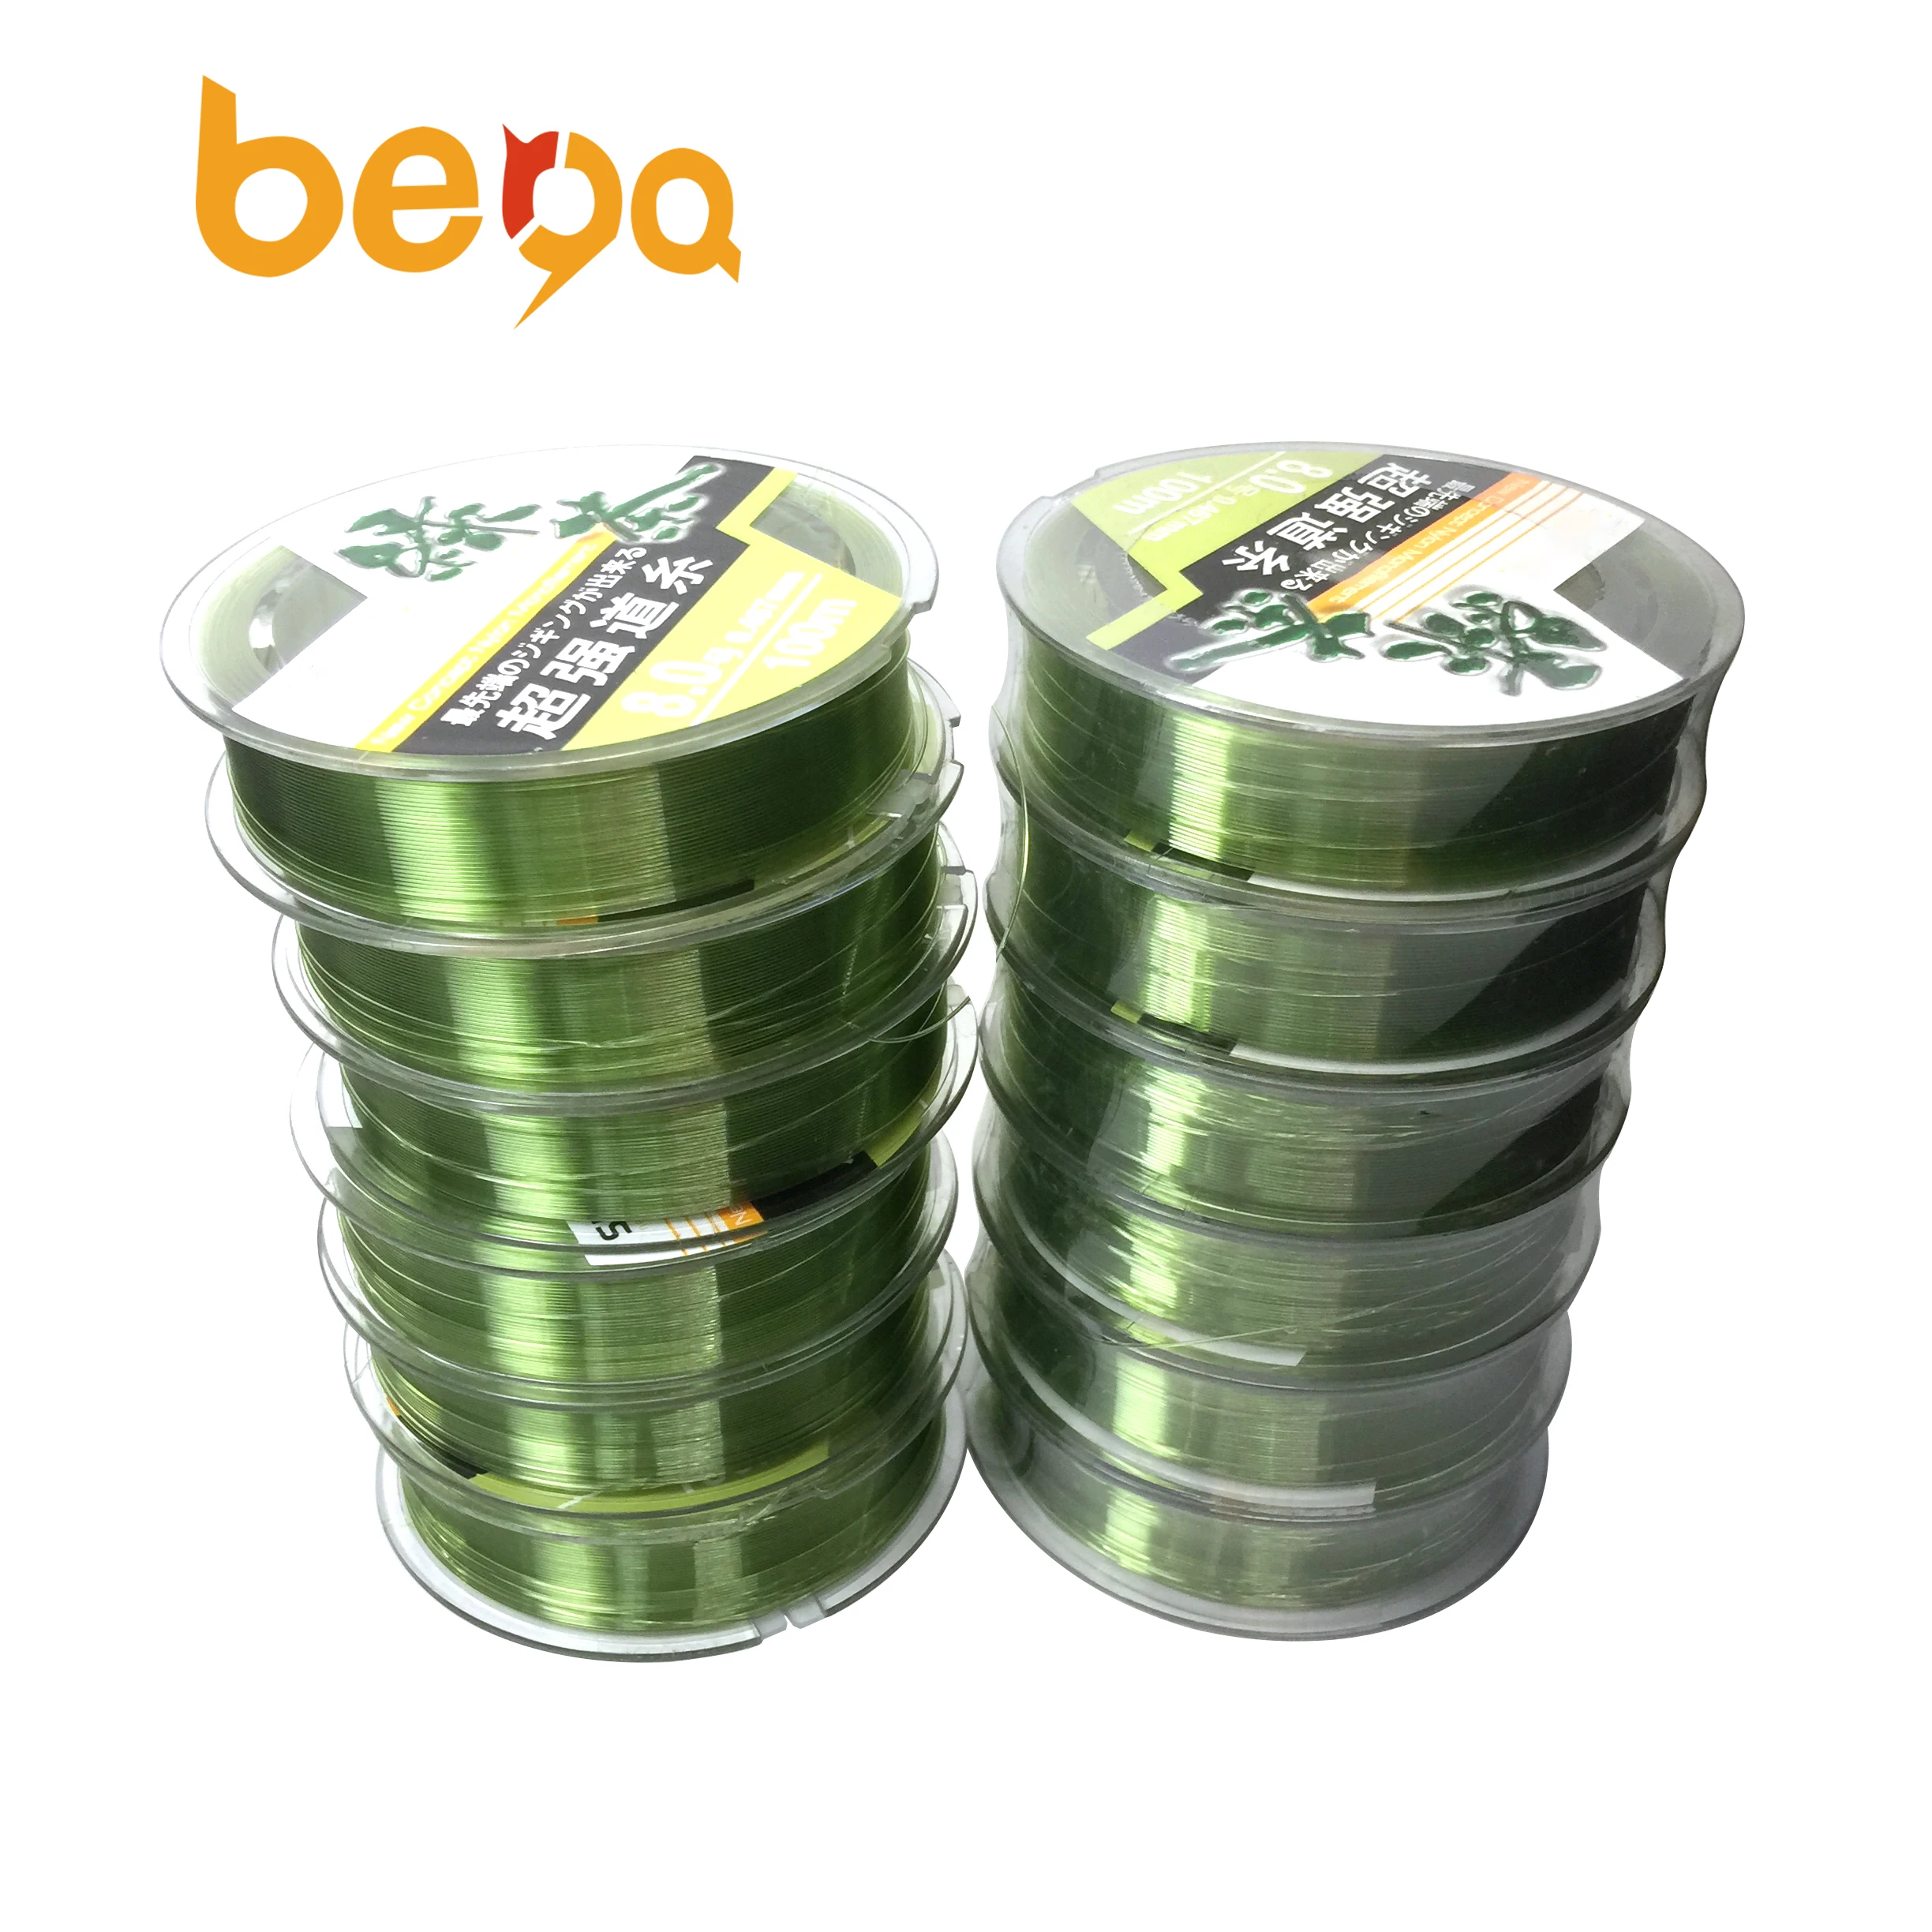 

100M/Roll Factory wholesale 500M/Rolls monofilament Super Strong Durable High-density Fiber Nylon Quality Fishing Line, Green ,customizable